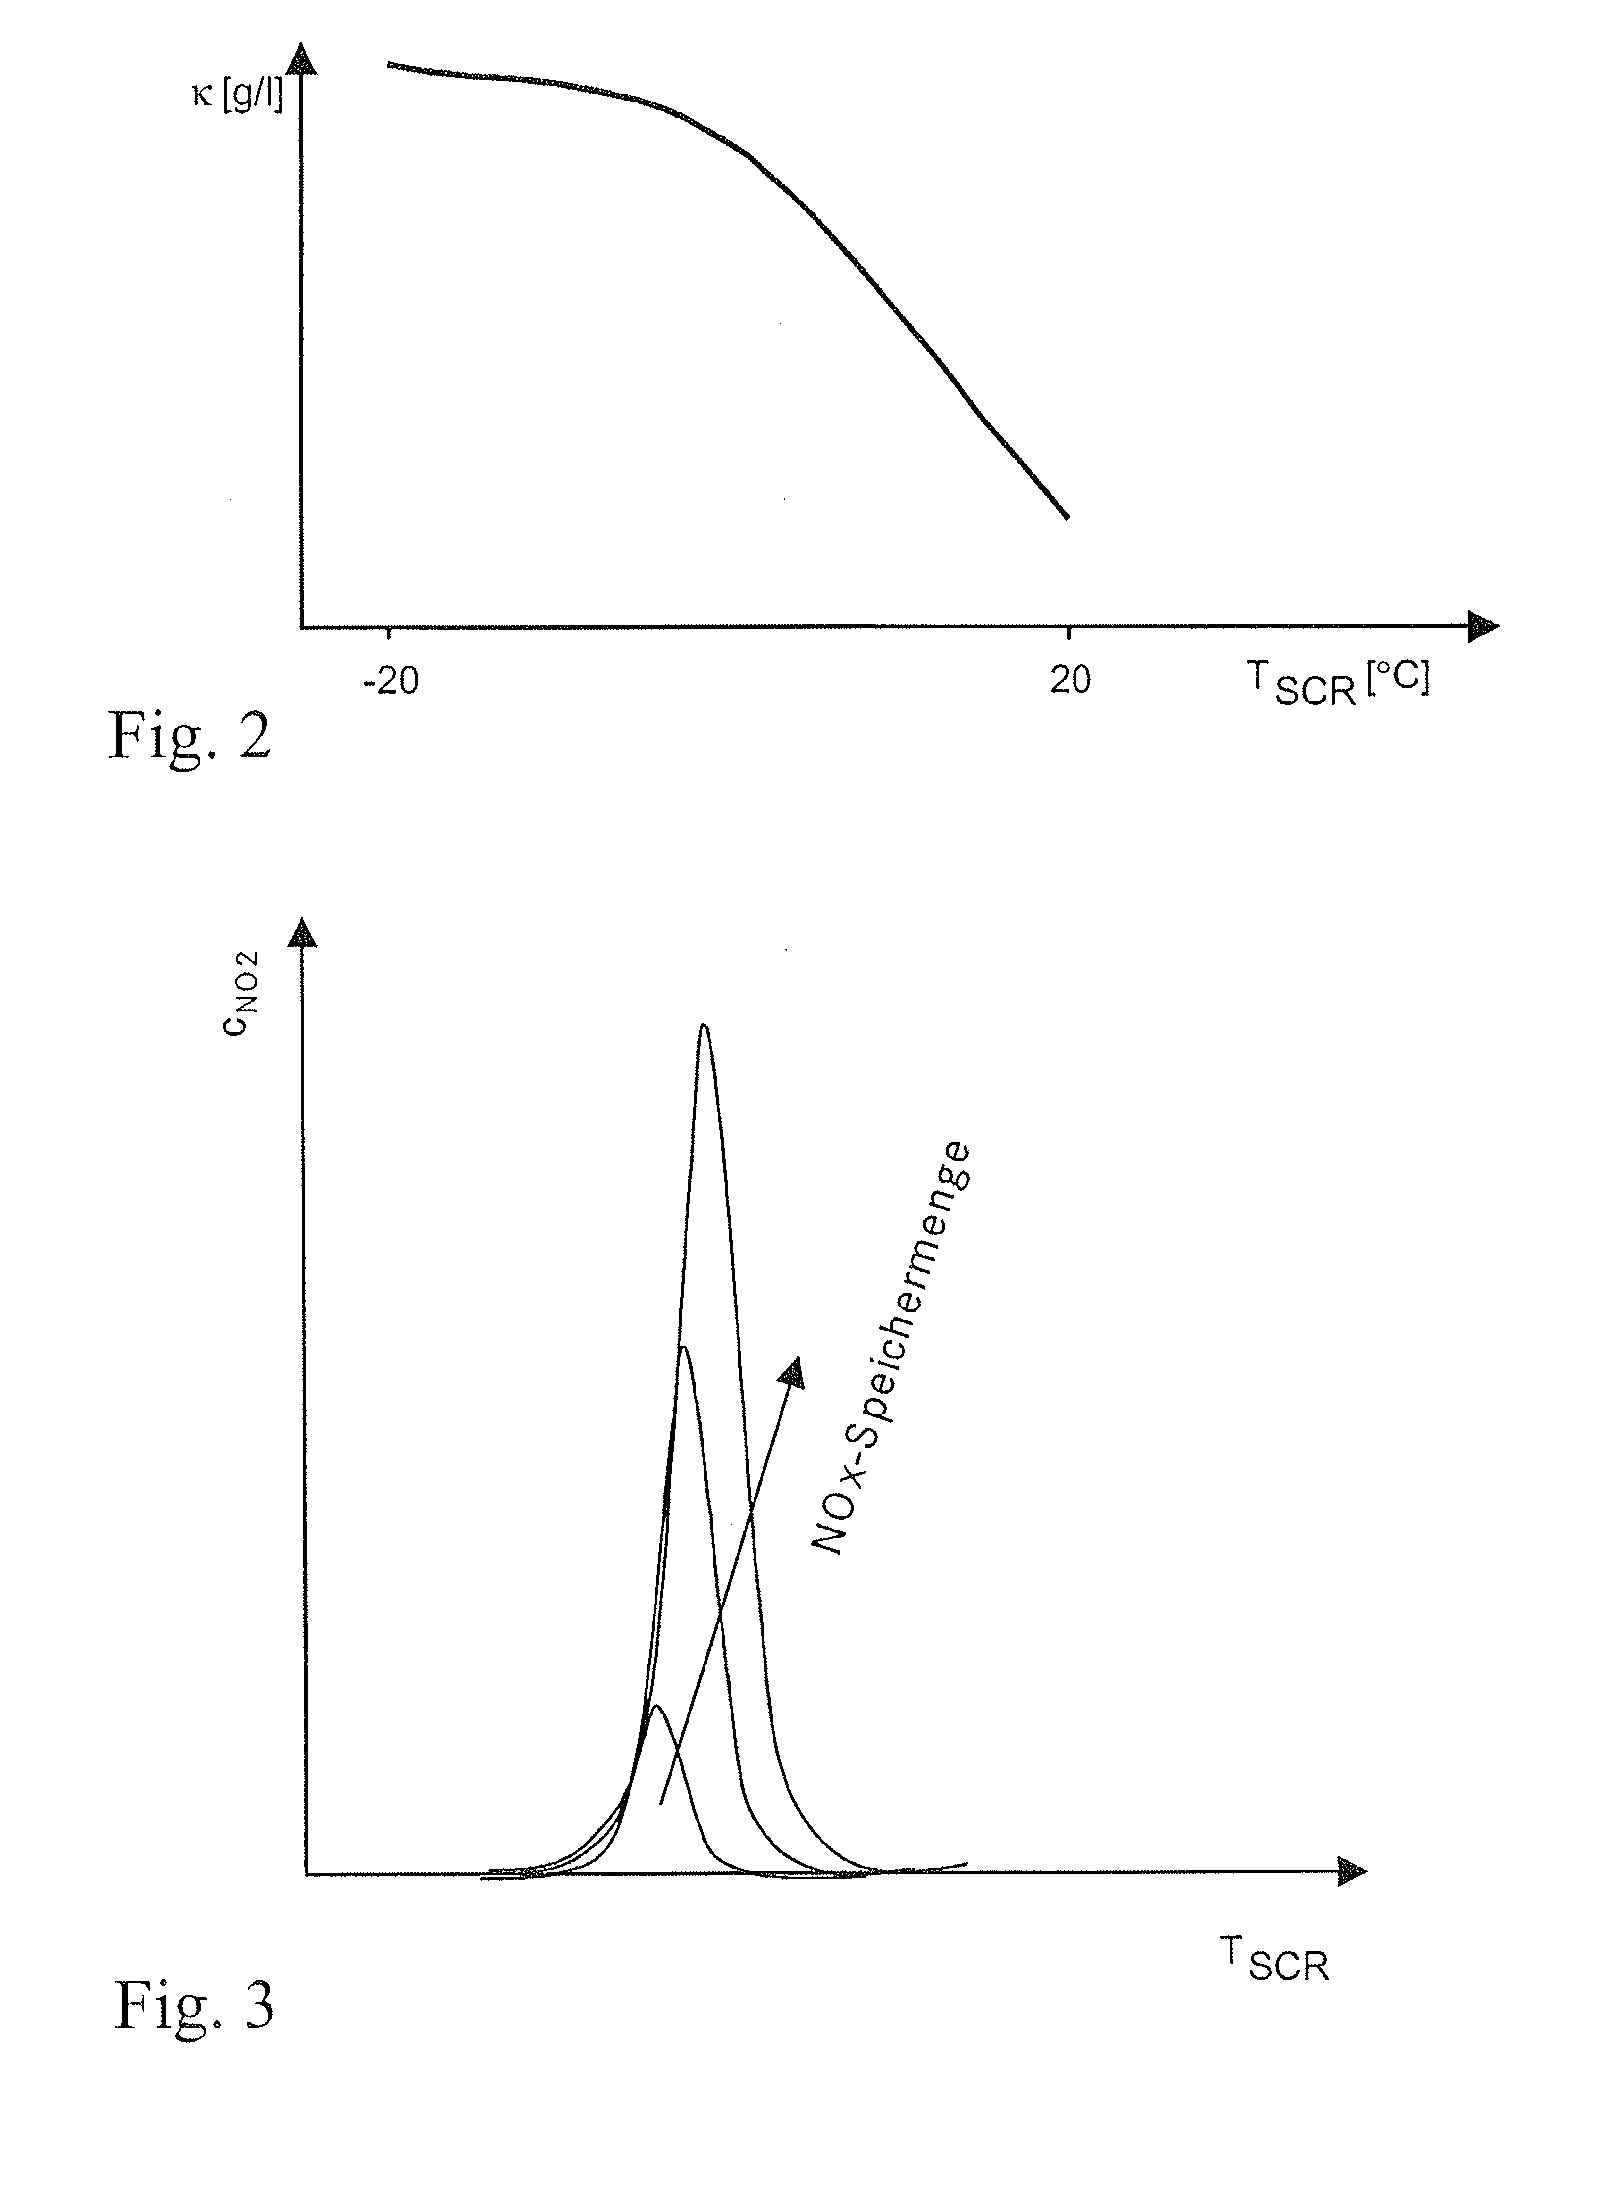 Method for the Operation of an Internal Combustion Engine Comprising an Emission Control System that Includes an SCR Catalyst